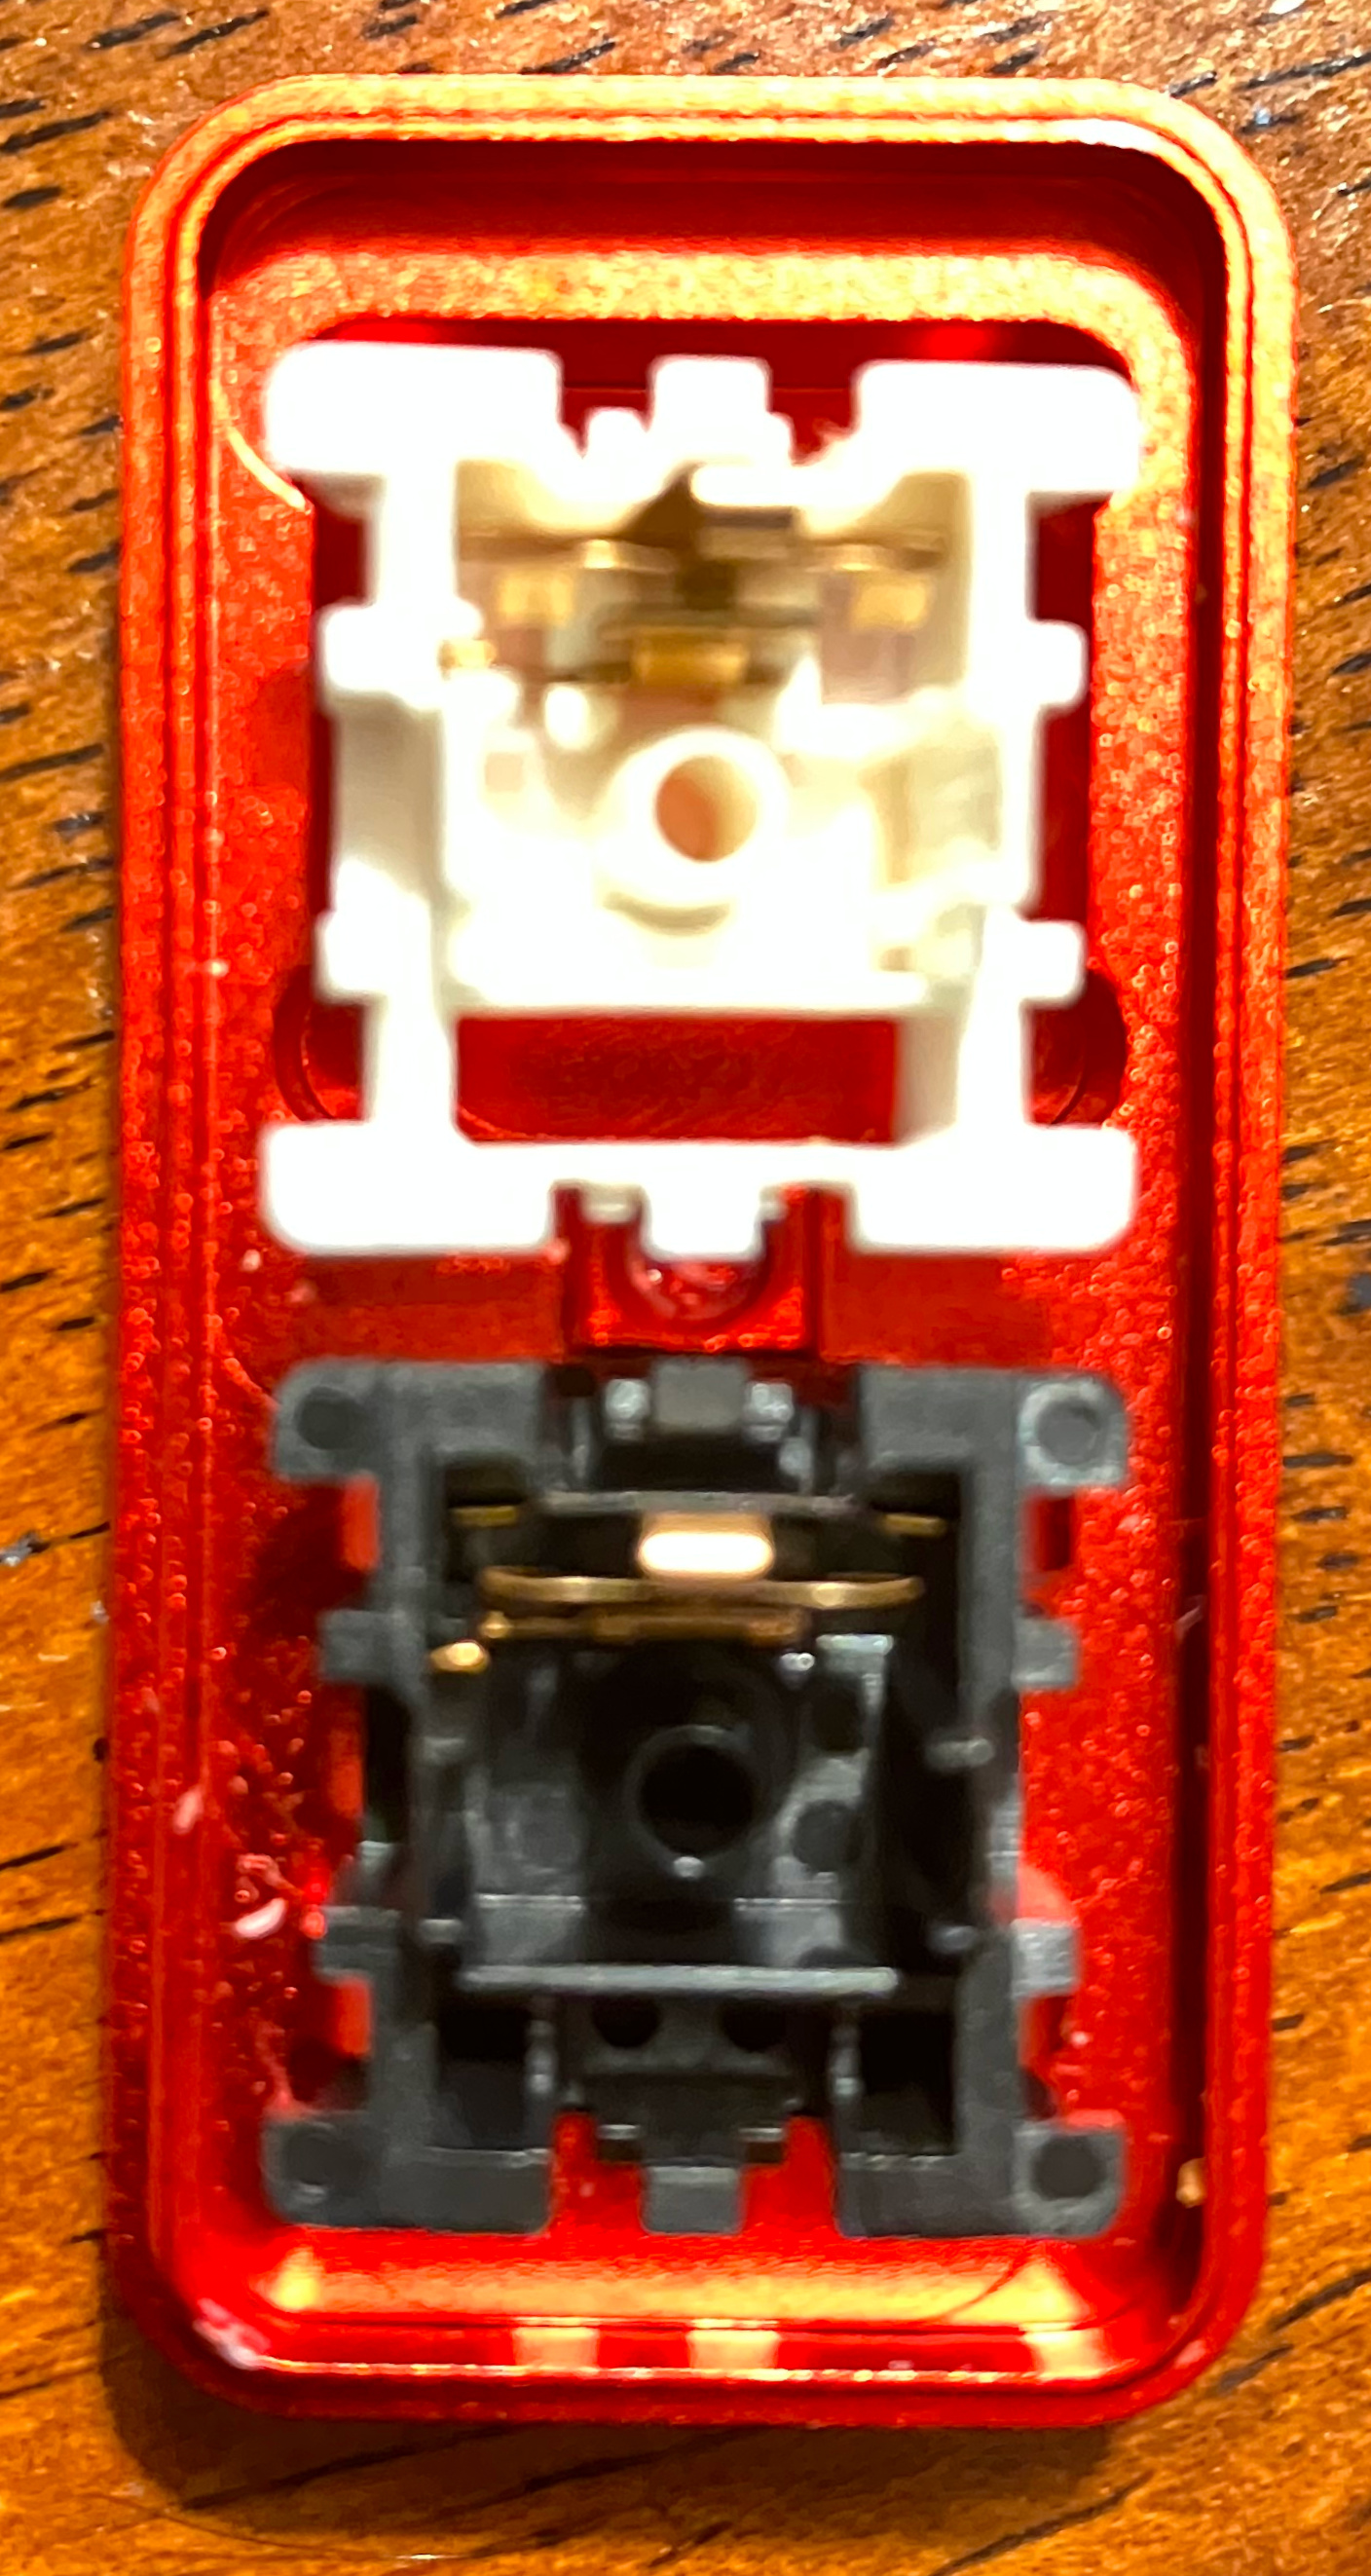 comparison image of two switch housings